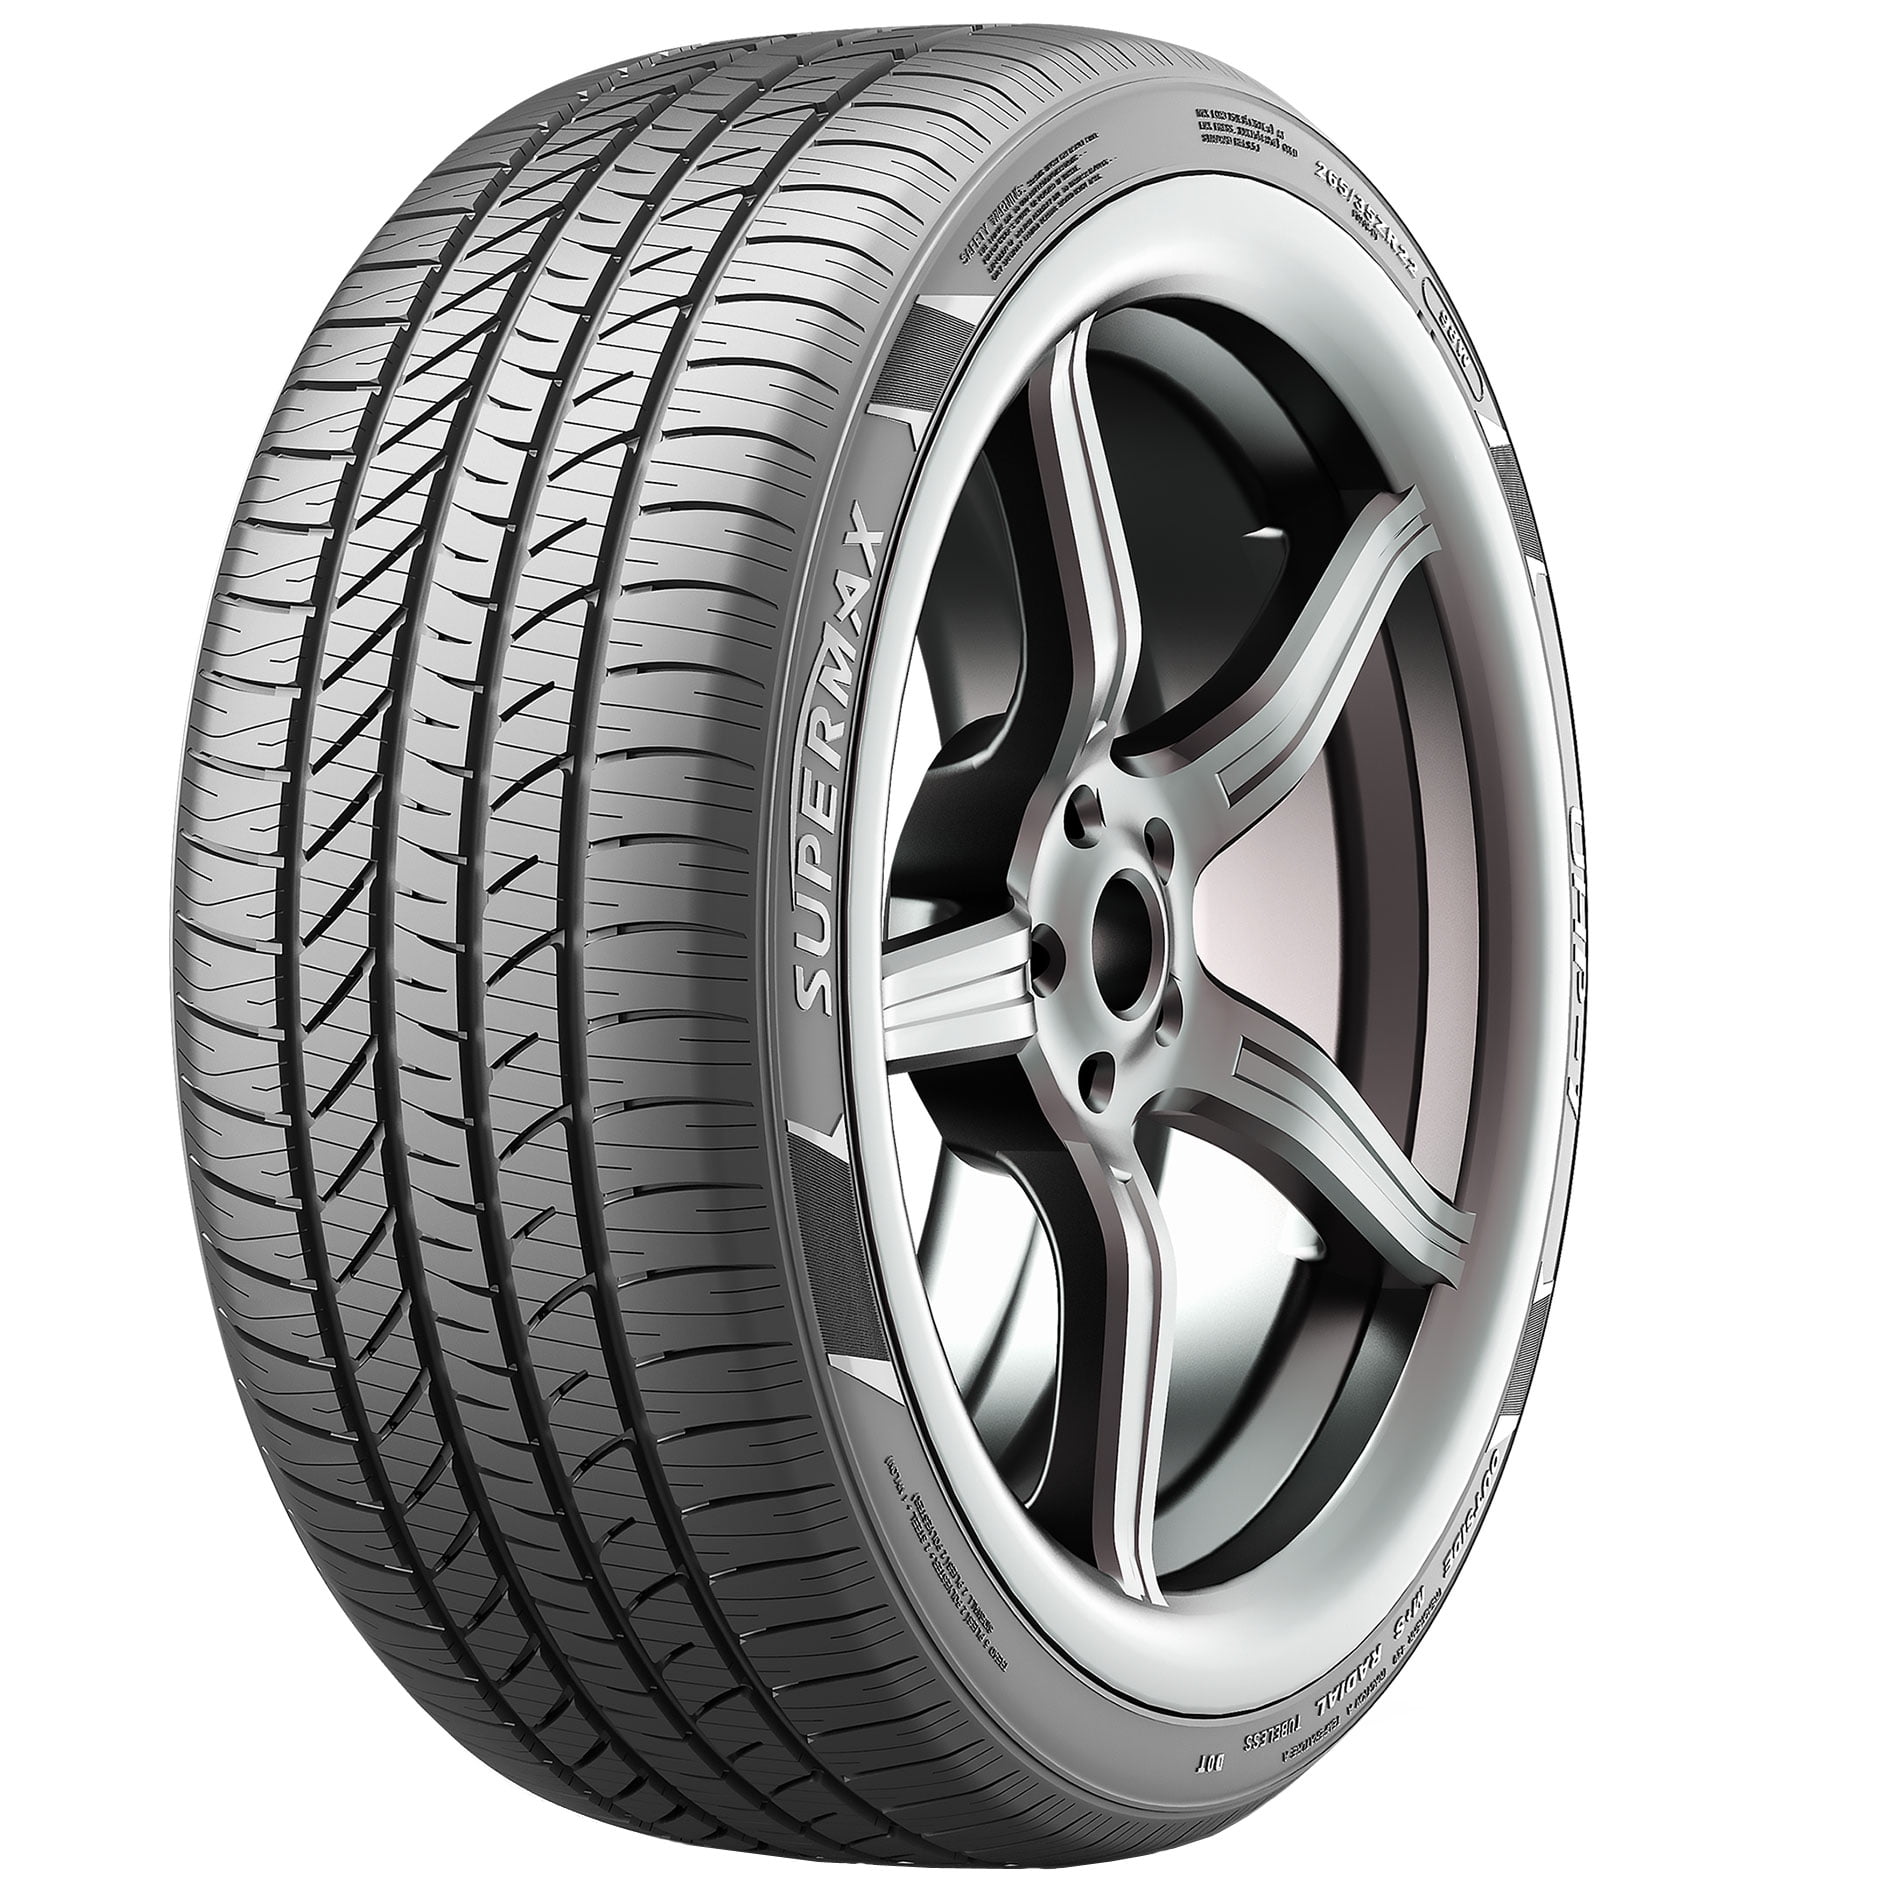 2 x 225/45 17 MAXXIS PREMITRA HP5 225/45ZR17 91W XL TYRES A RATED WET GRIP 